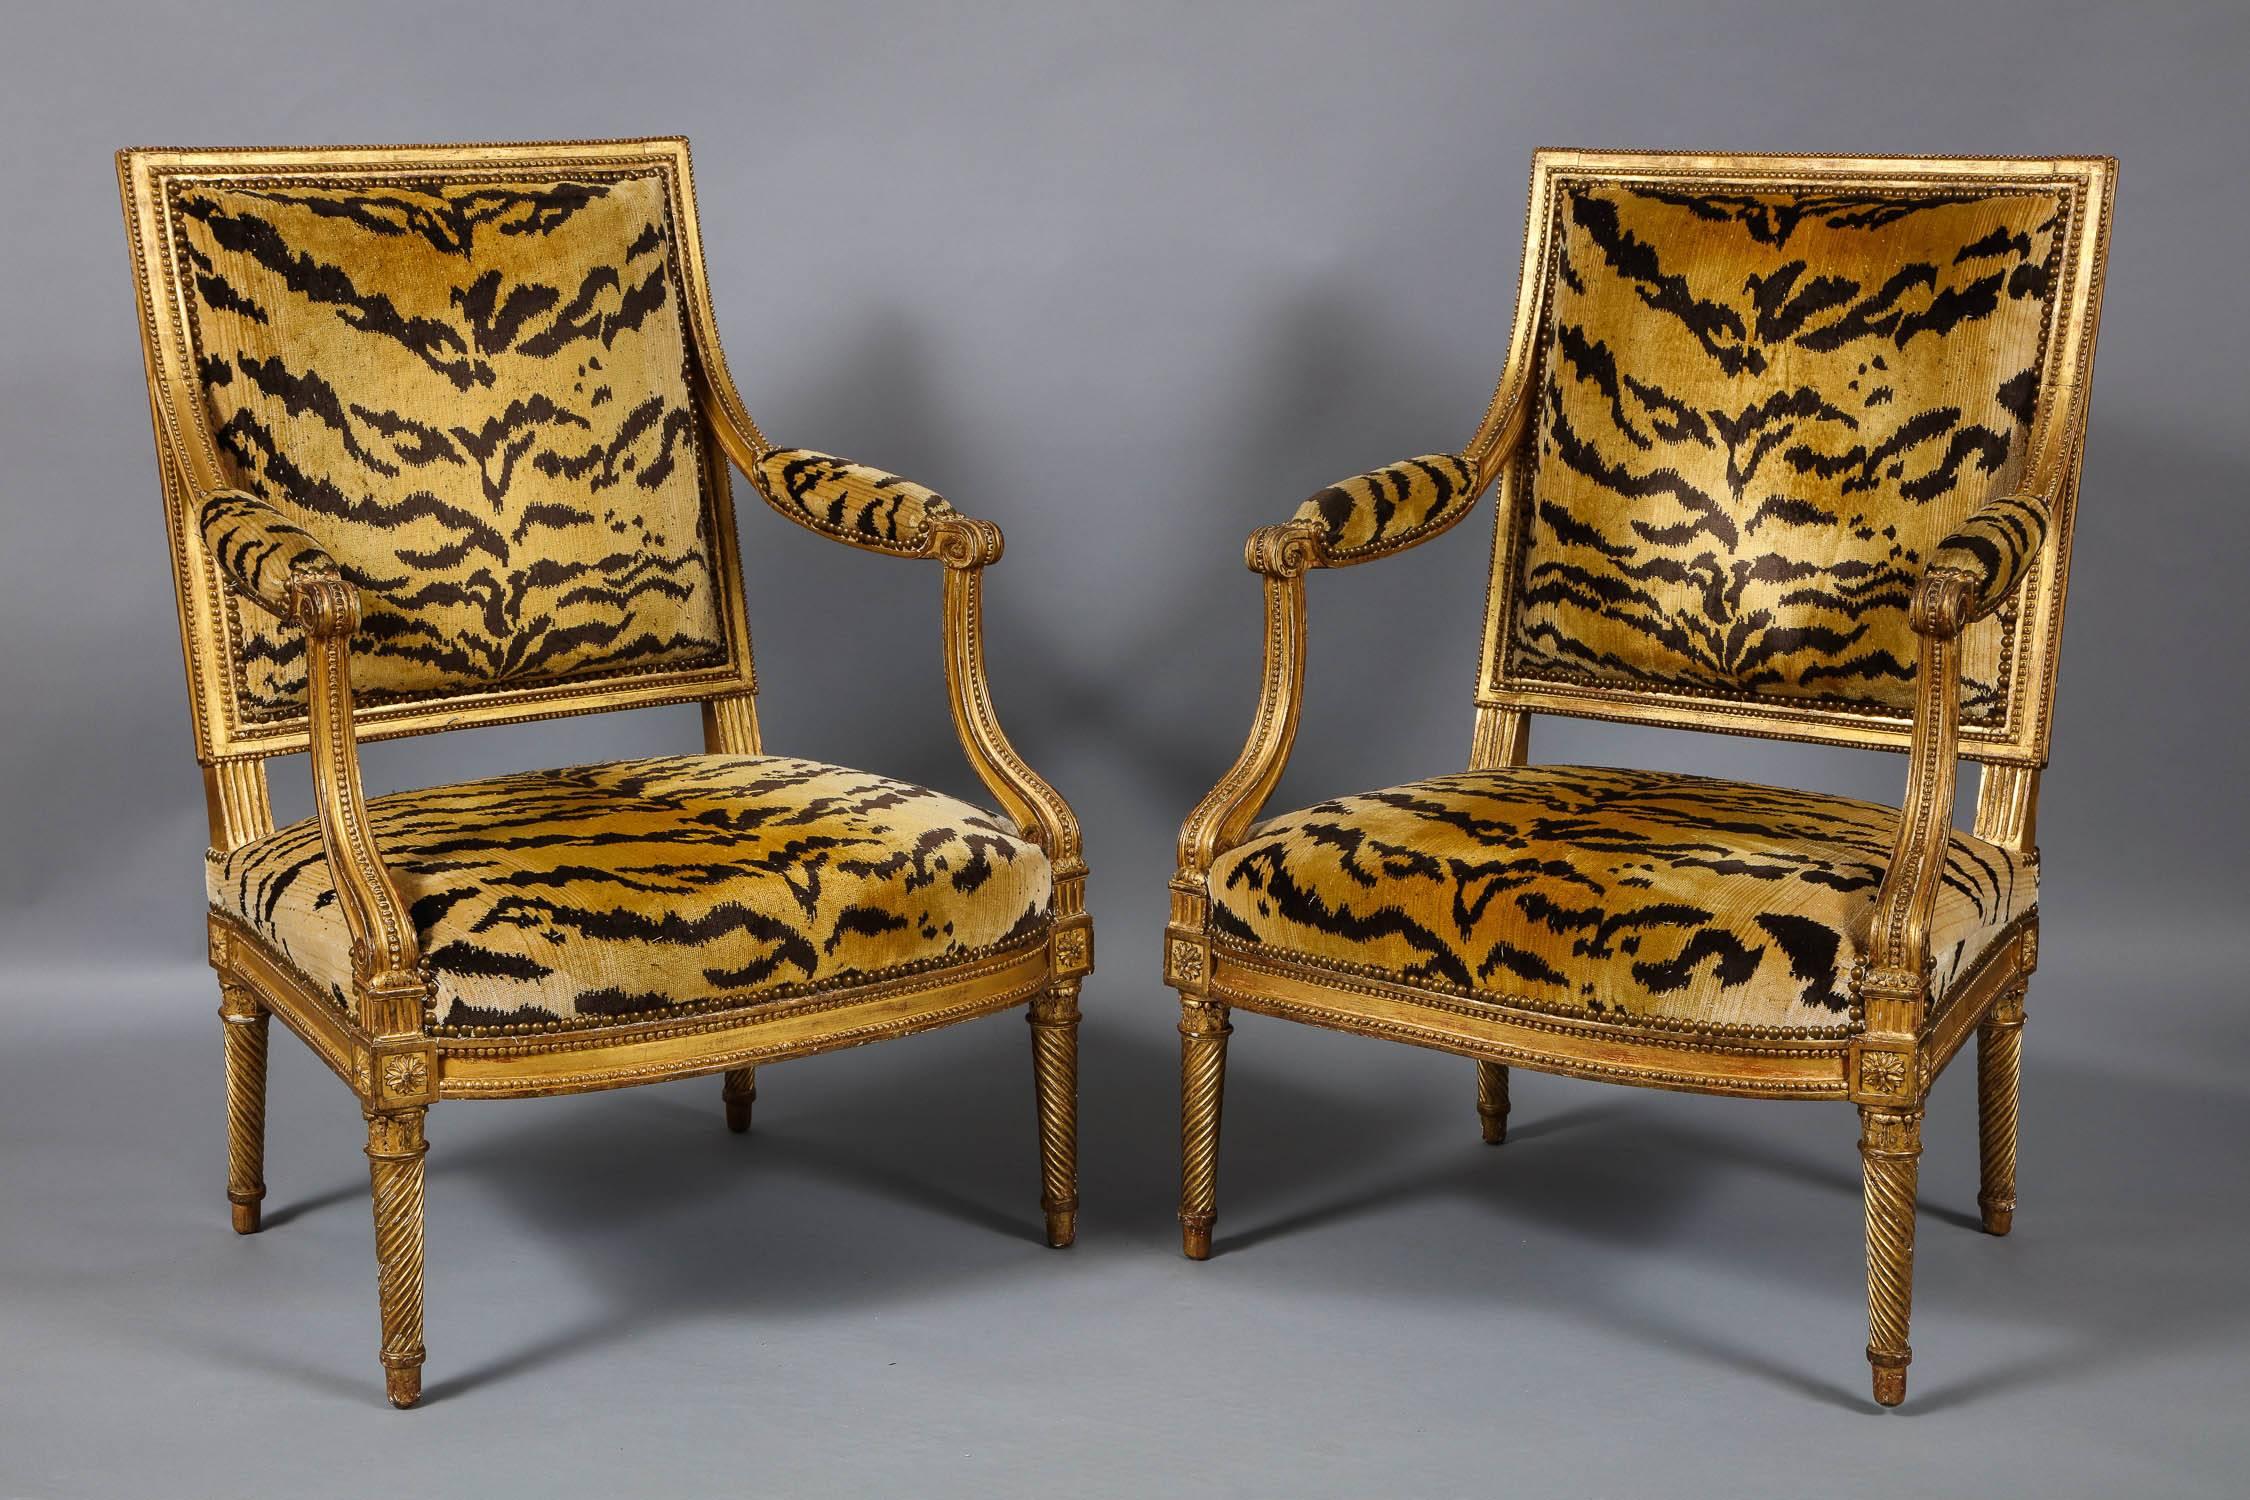 Fine and important pair of 18th century French giltwood open armchairs by Henri Jacob, the square backs with bead carved borders in highly burnished and contrasting matte gilding, the scrolled arms over curved supports, the apron with rounded front